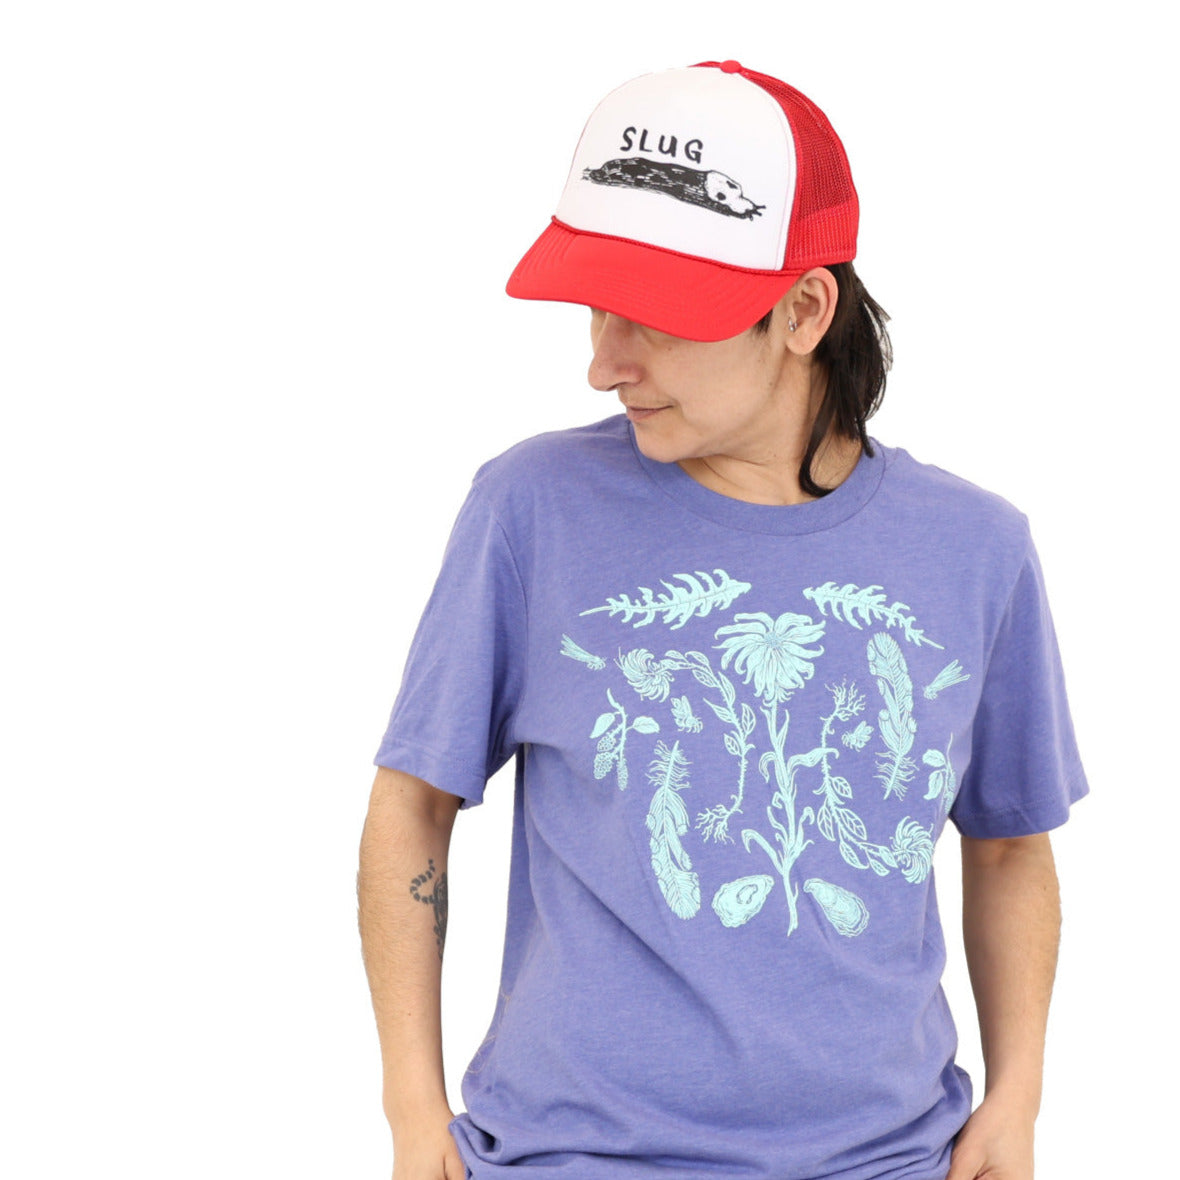 Woman wearing a light purple colored t-shirt with light blue ink of flowers, ferns, feathers, shells, etc